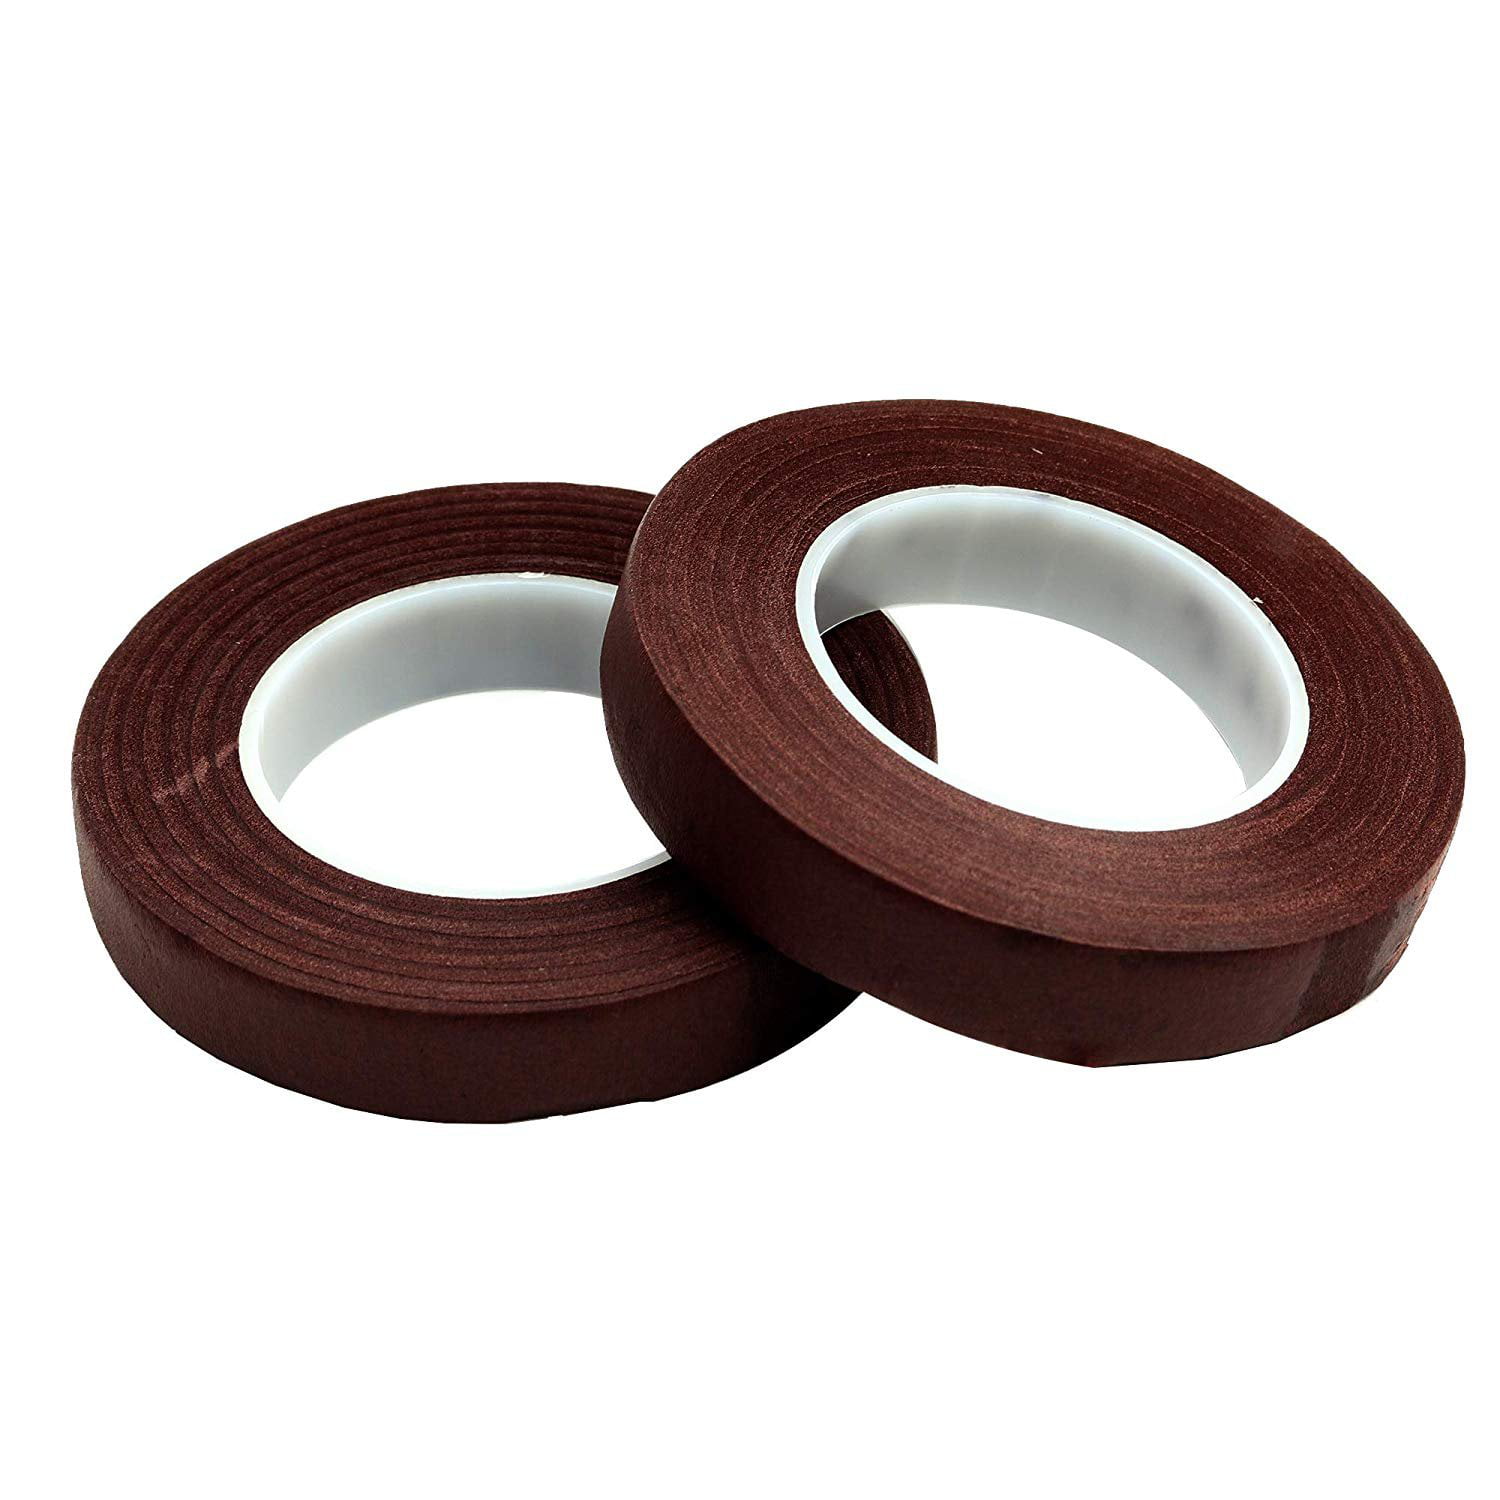 CK Products Floral/Florist Tape for Stems of Gum-Paste Flowers/Silk  Flowers; 1/2 Inch x 30 Yards Brown, 2